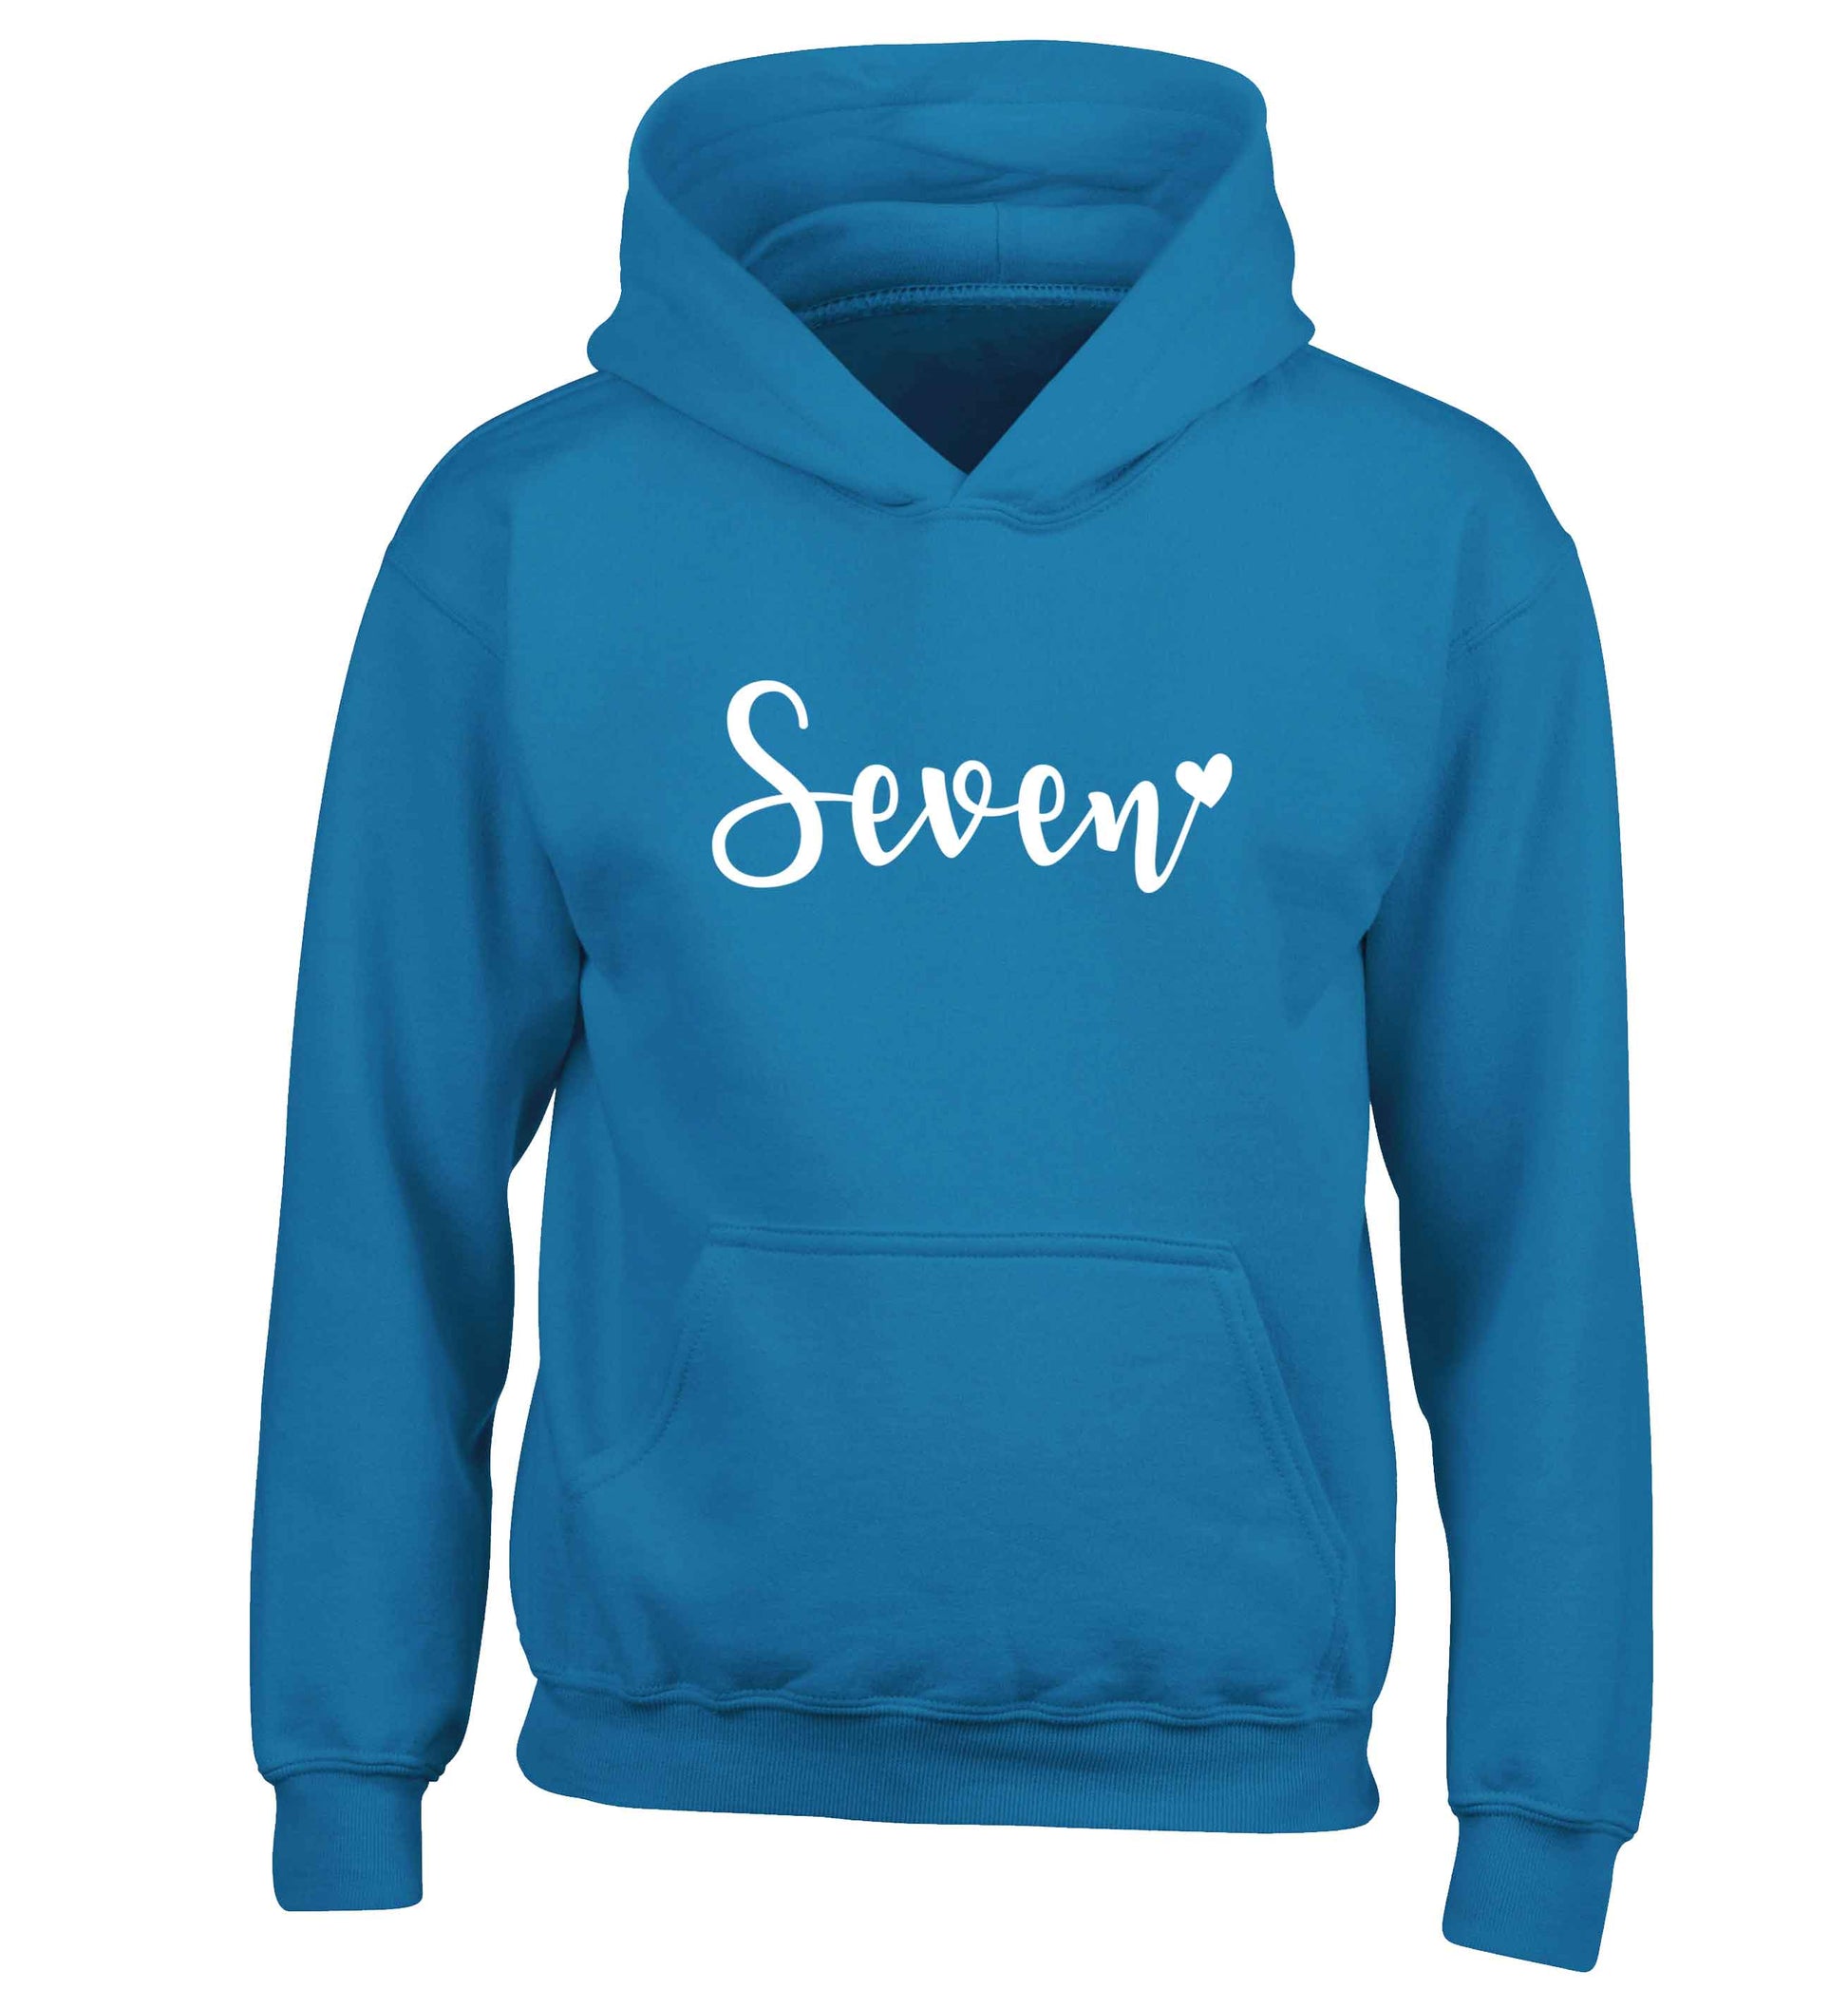 Seven and heart children's blue hoodie 12-13 Years